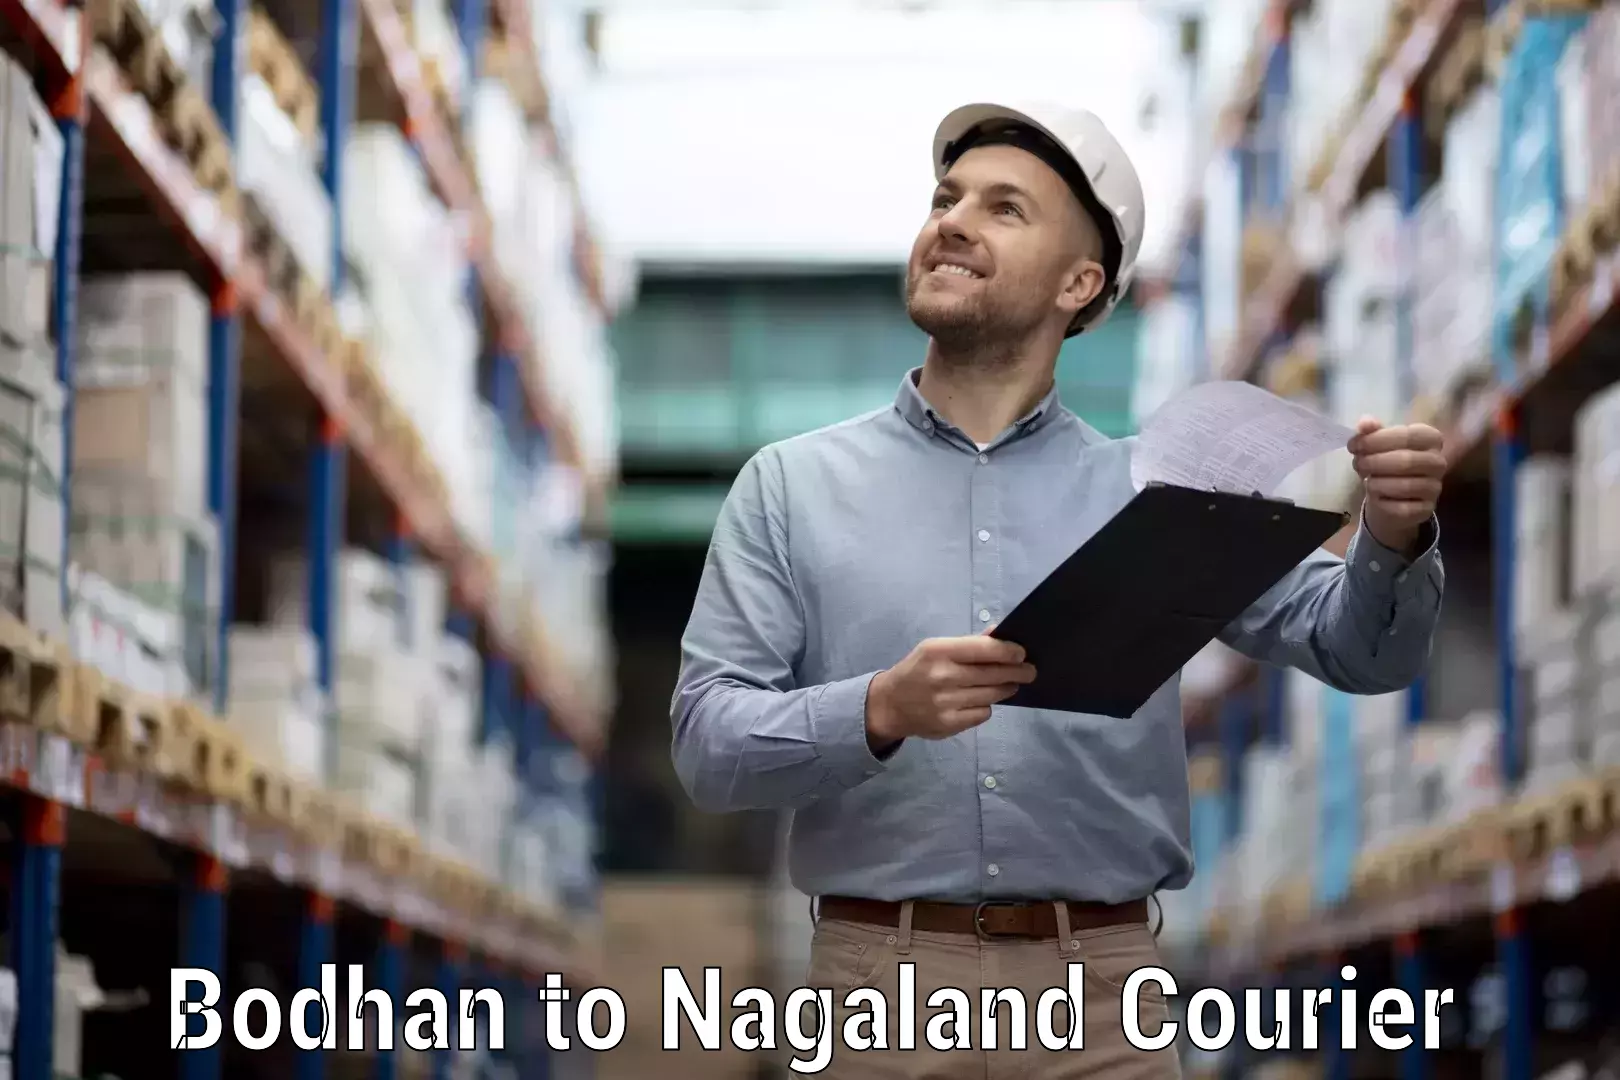 Cash on delivery service Bodhan to Nagaland